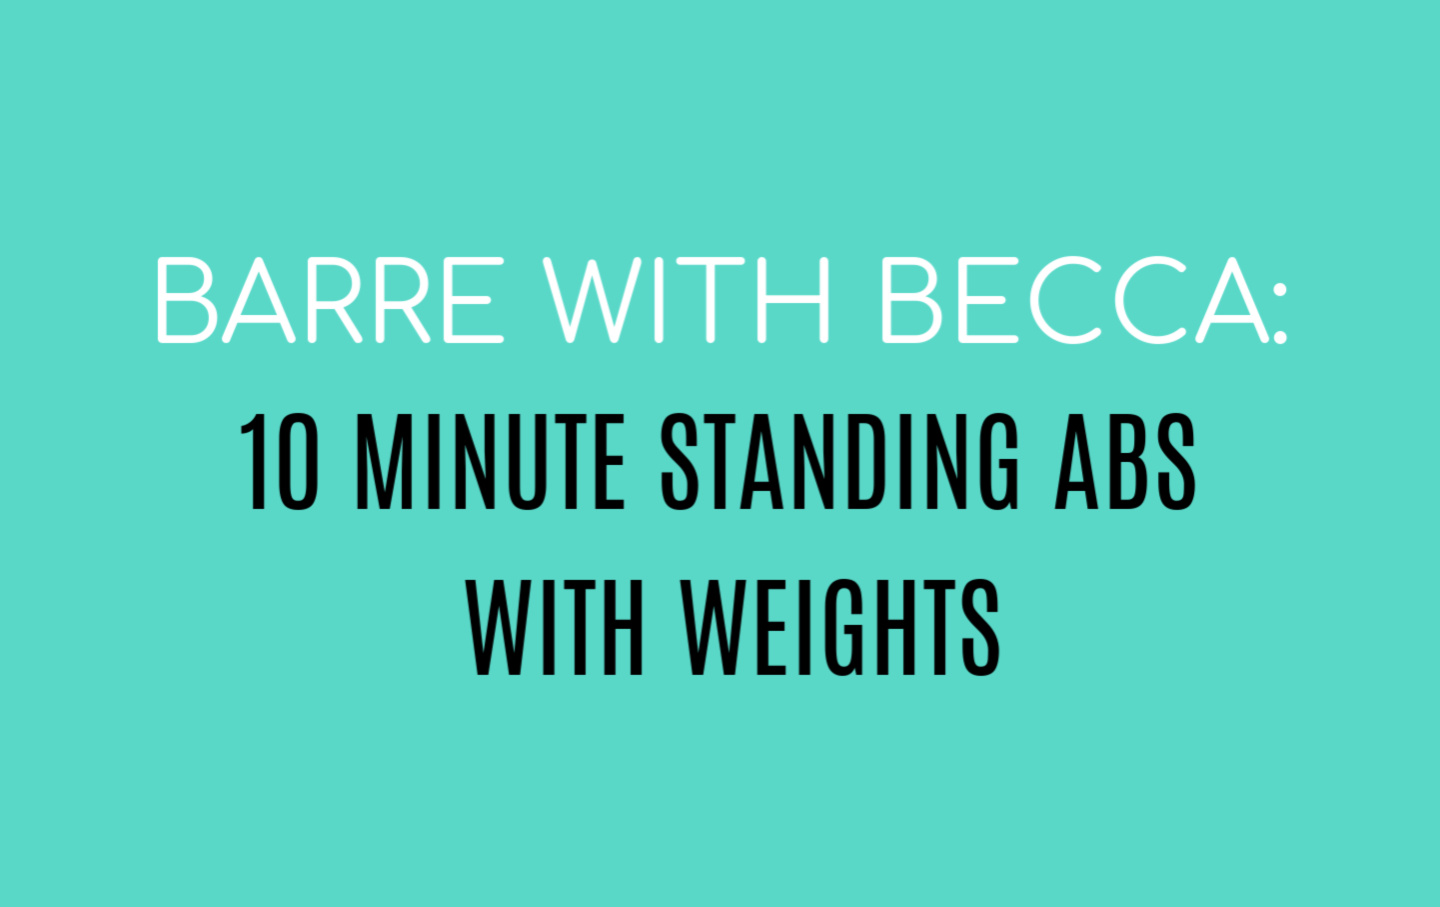 Standing Abs Workout – 10 Minute of Standing Abs Exercises for a